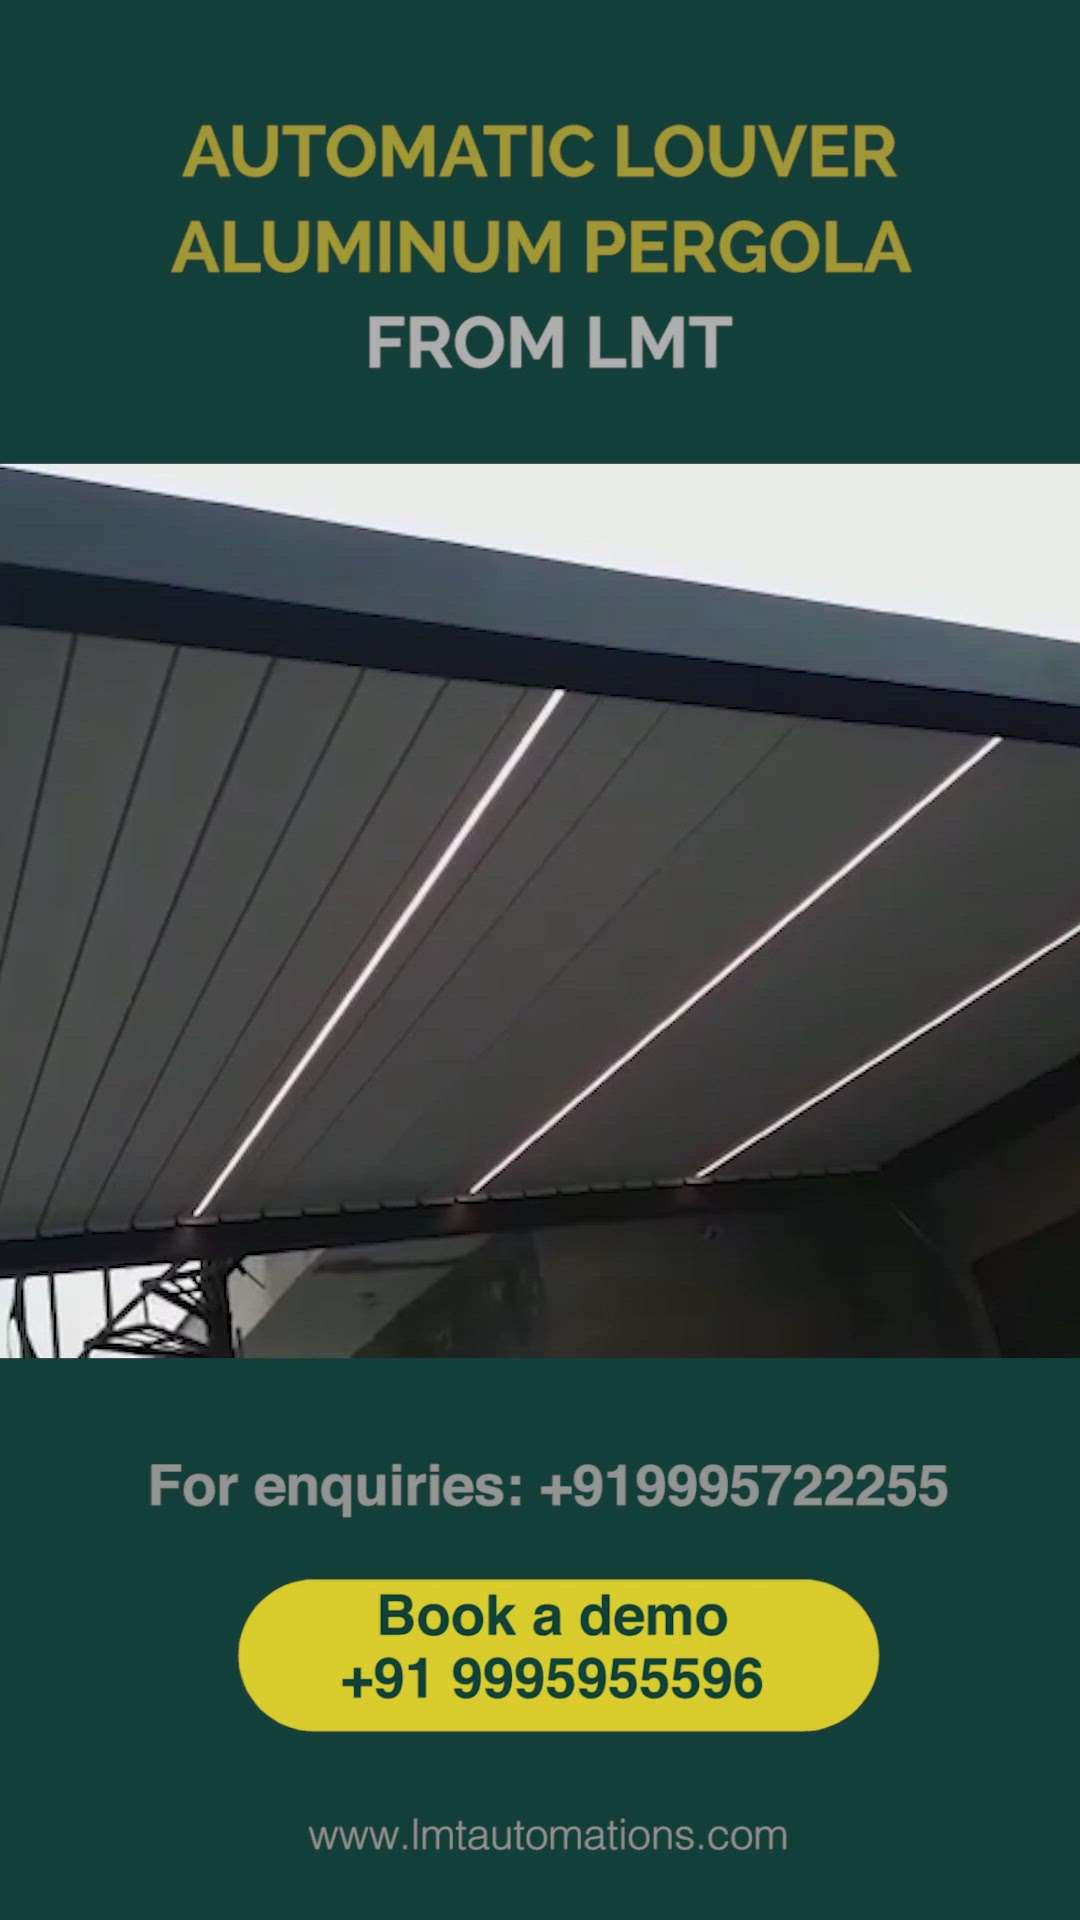 AUTOMATIC  LOUVERS PERGOLA IN KERLA #HomeAutomation #HouseDesigns #RoofingIdeas #automationsolutions #KeralaStyleHouse #ContemporaryDesigns #automaticroofing #automatic_shutters #automaticgates